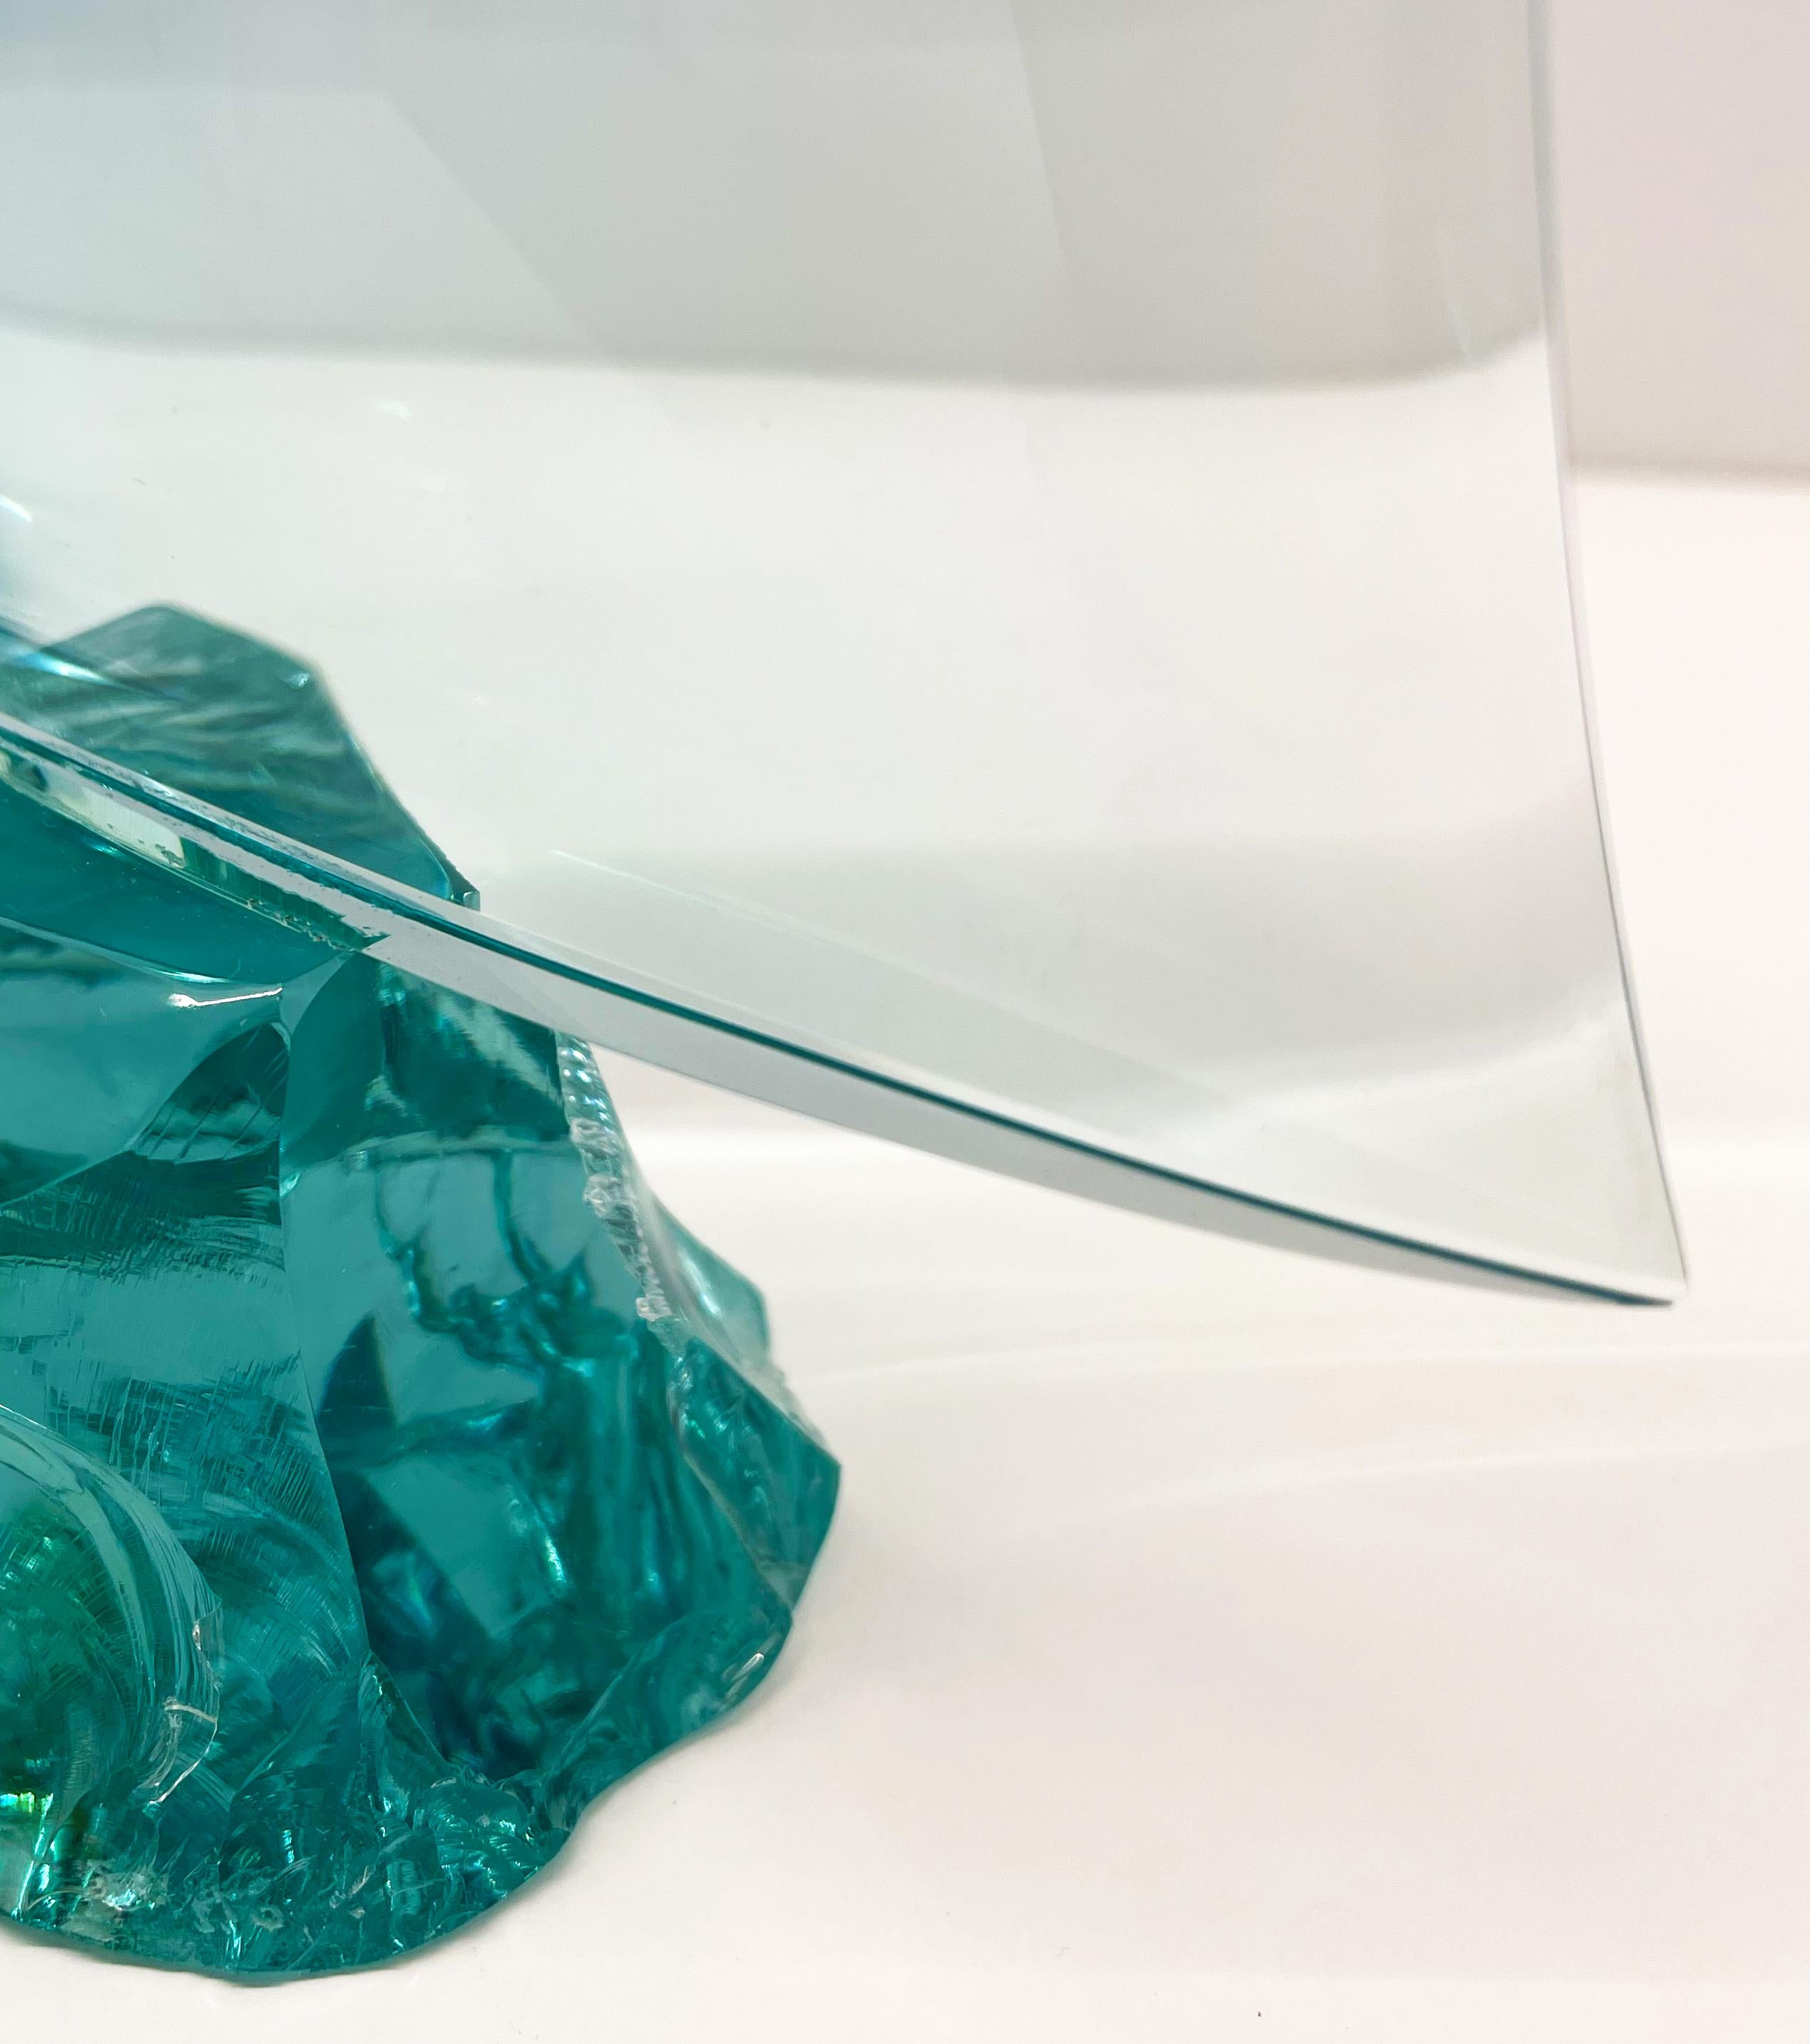 Contemporary 'Sail' Handmade Aquamarine Crystal Sculpture by Ghirò Studio In New Condition For Sale In Pieve Emanuele, Milano